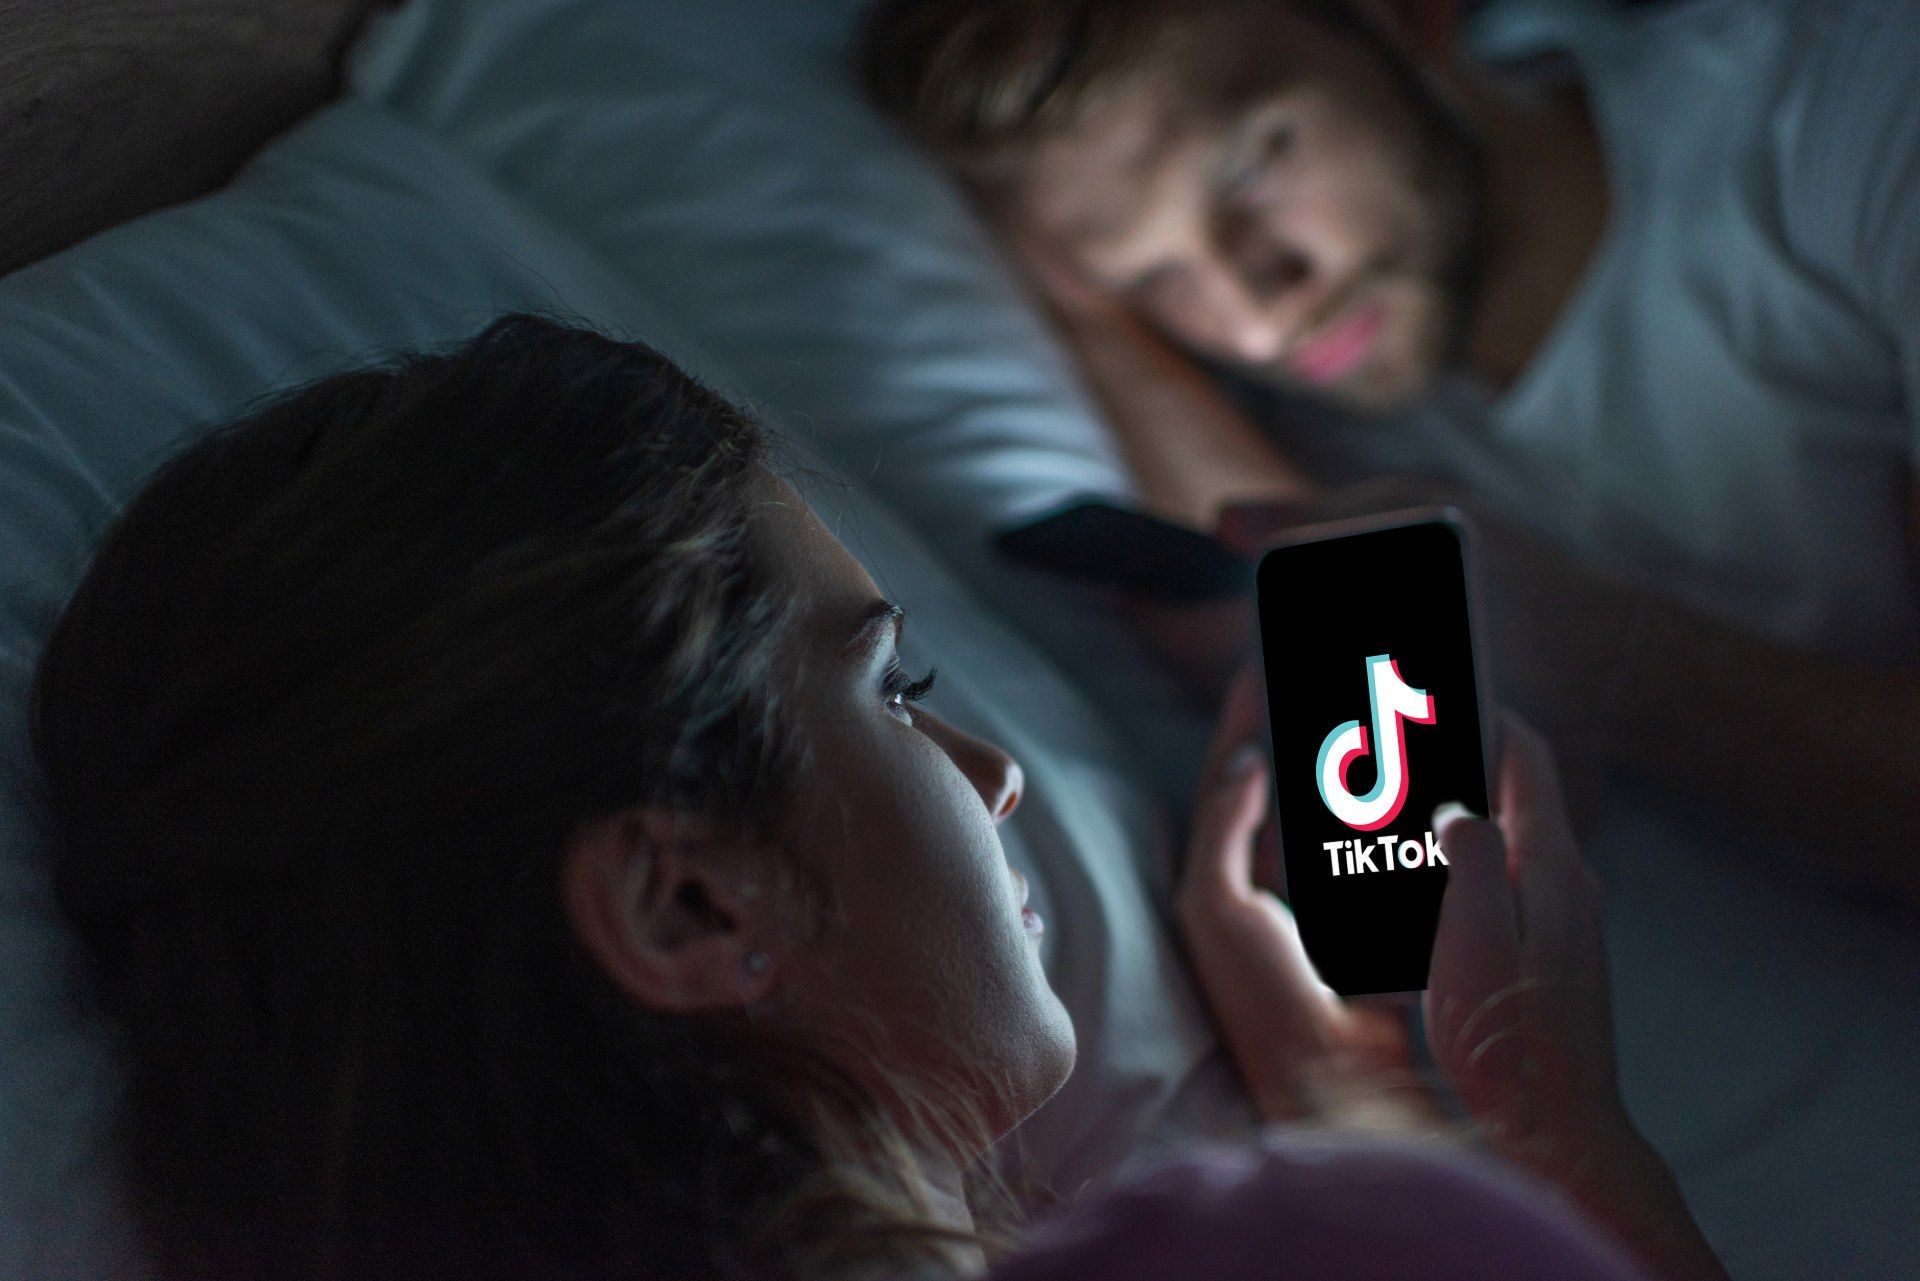 Woman lies in bed looking at her smartphone, which shows the TikTok app load screen